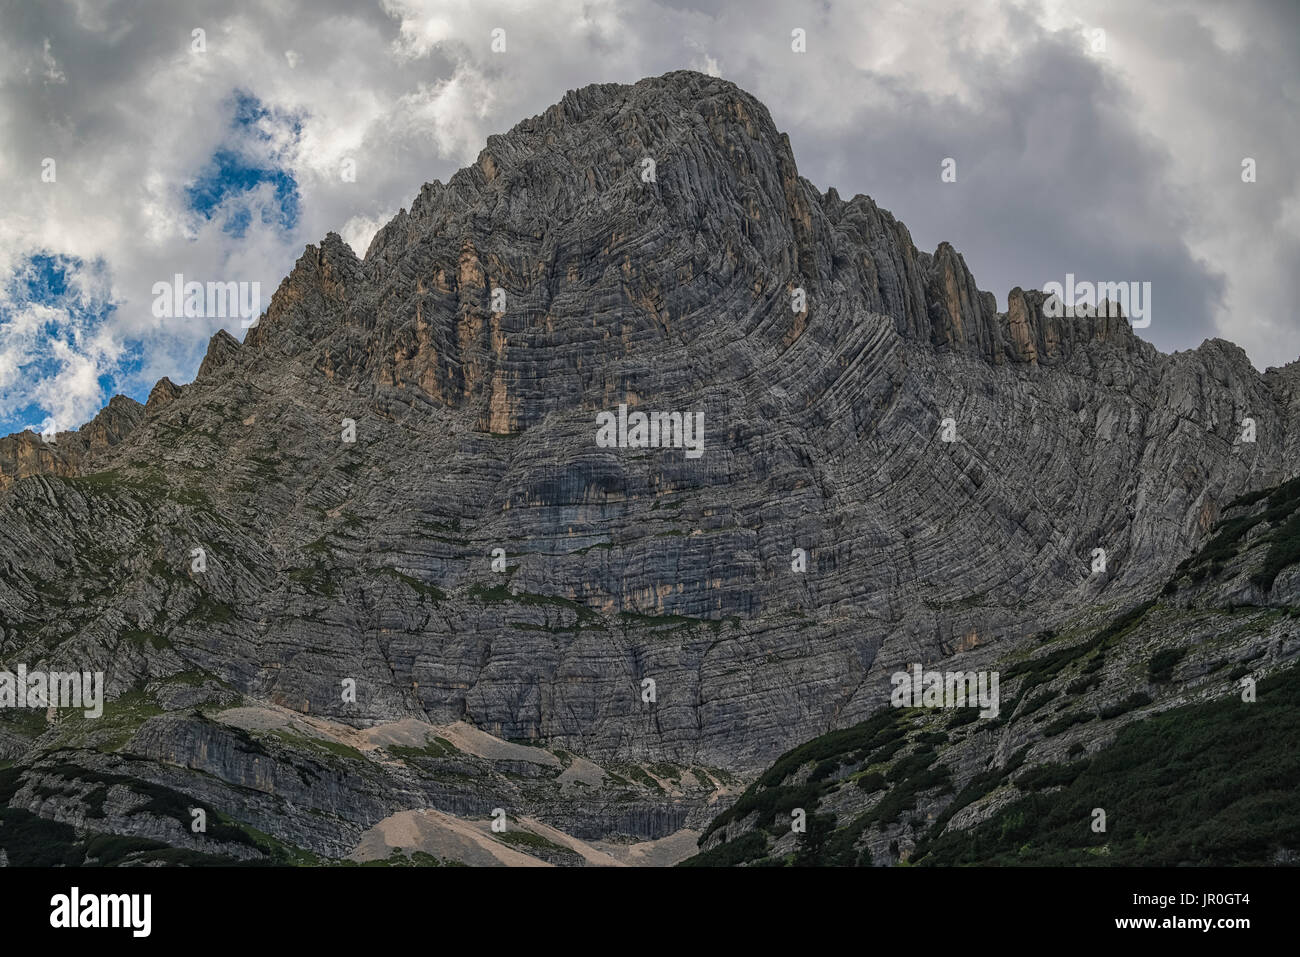 Plate Tectonics At Work, This Folded Mountain In The Italian Dolomites Is A Great Example; Cortina, Italy Stock Photo